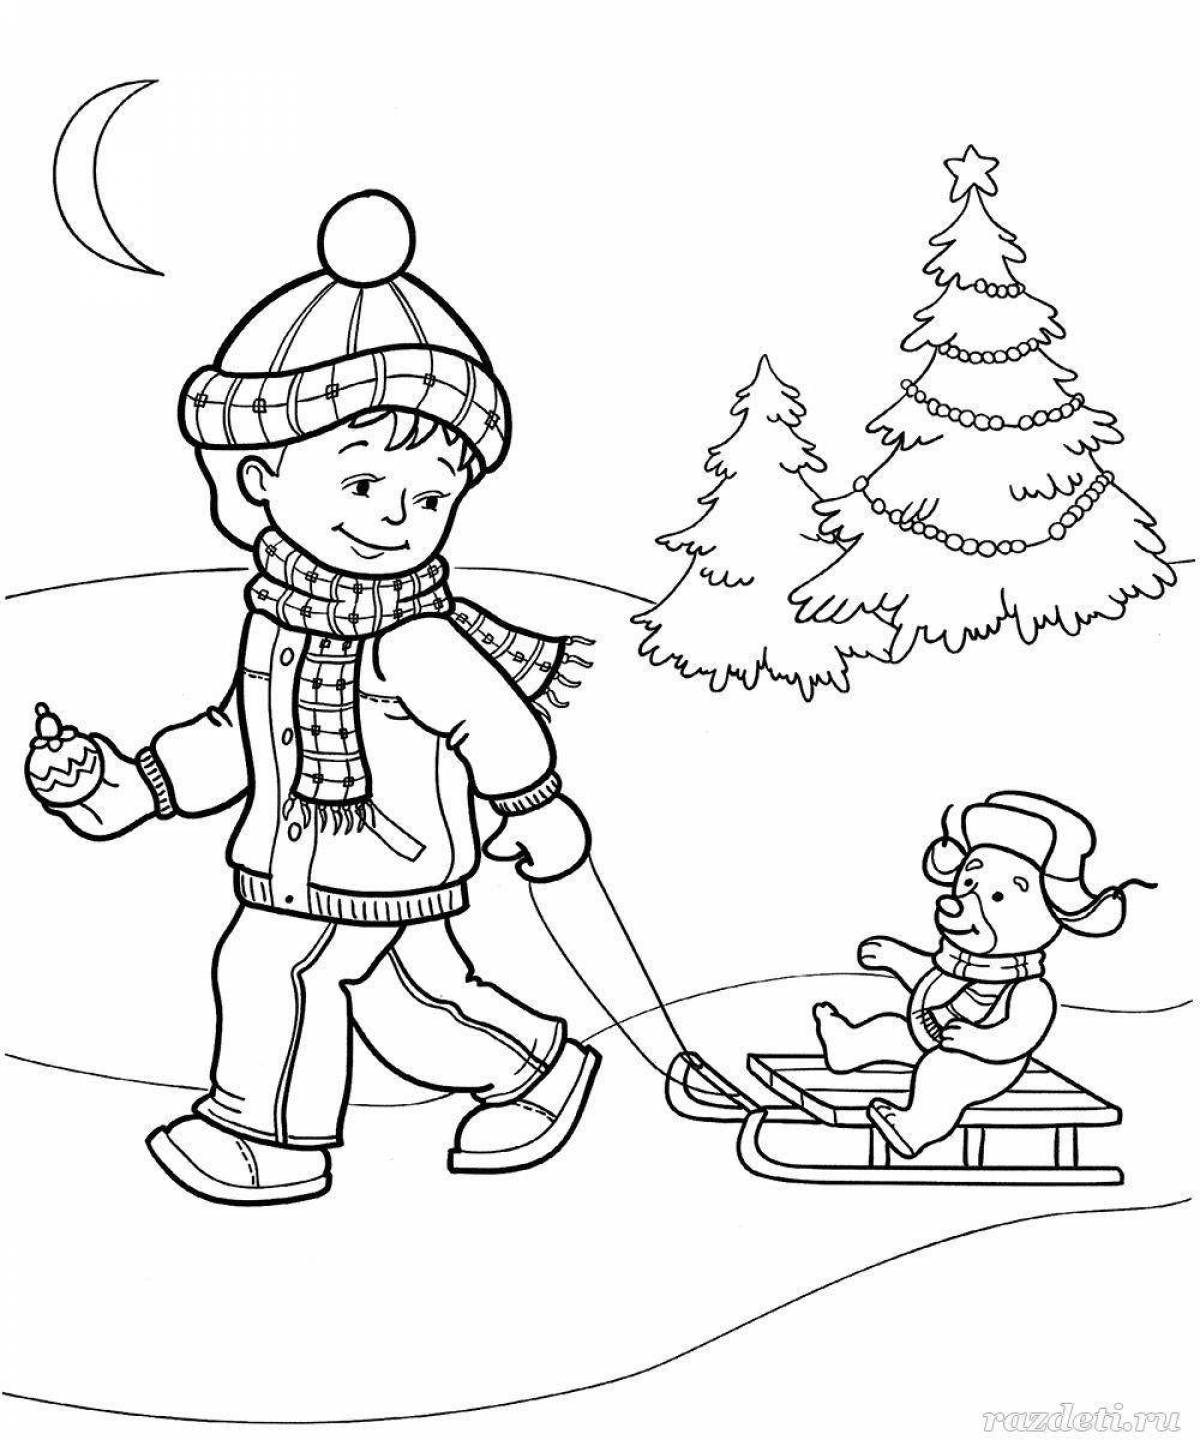 Joyful winter coloring book for 3-4 year olds